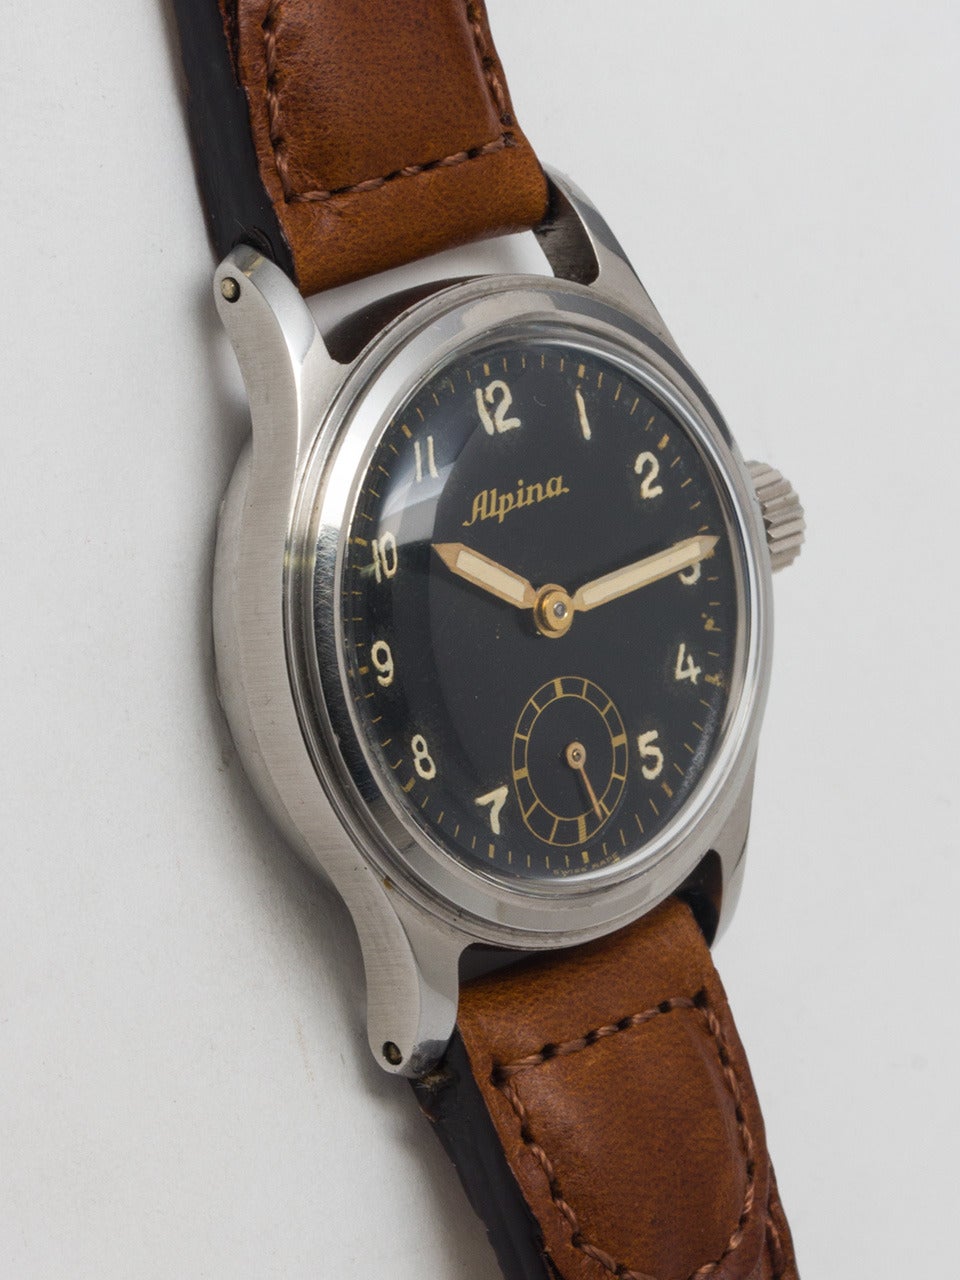 Alpina stainless steel military wristwatch, circa 1940s. 27.5 mm case and acrylic crystal. With original glossy black dial with luminous Arabic indexes and luminous pencil hands. 17-jewel manual-wind movement with sweep seconds. Very sharp looking